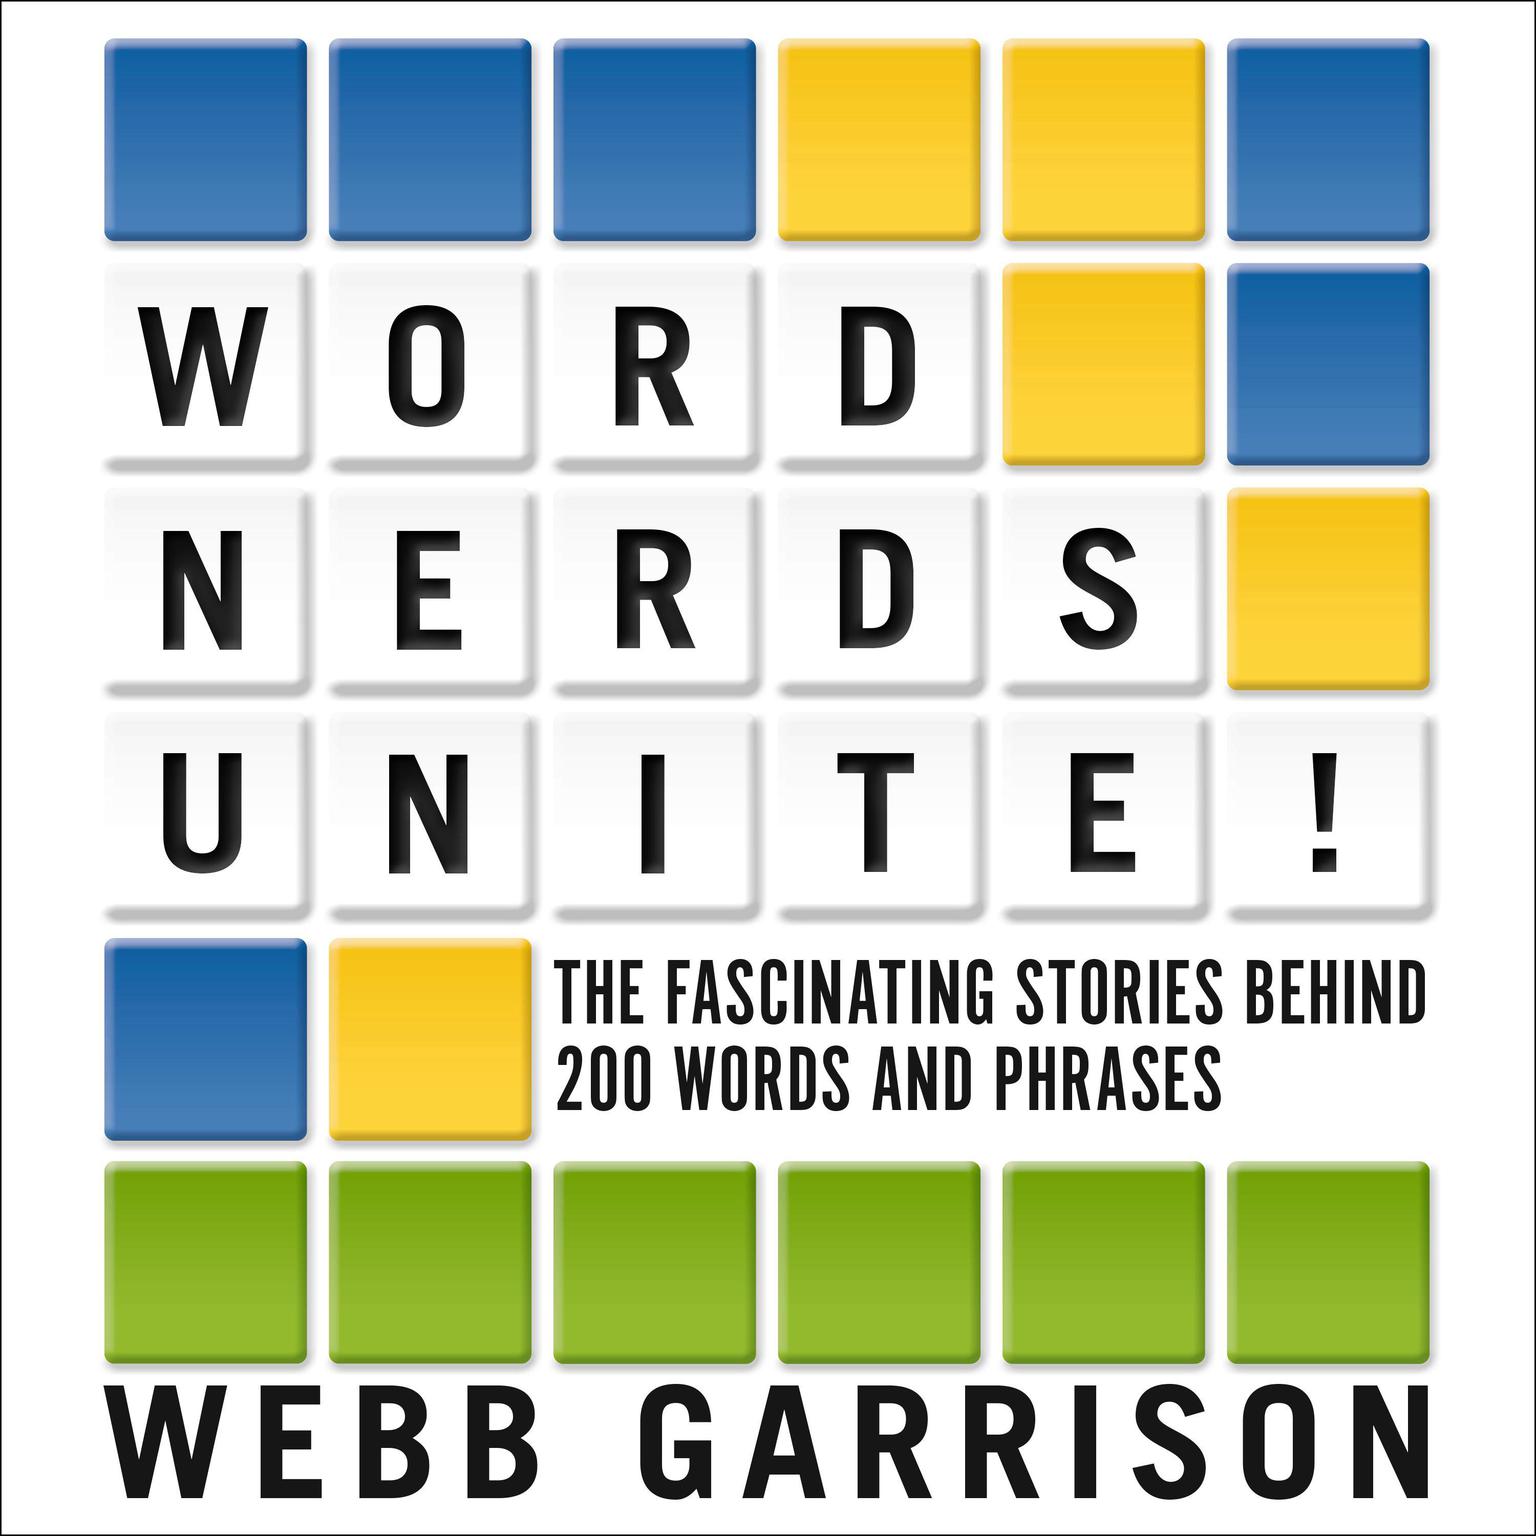 Word Nerds Unite!: The Fascinating Stories Behind 200 Words and Phrases Audiobook, by Webb Garrison